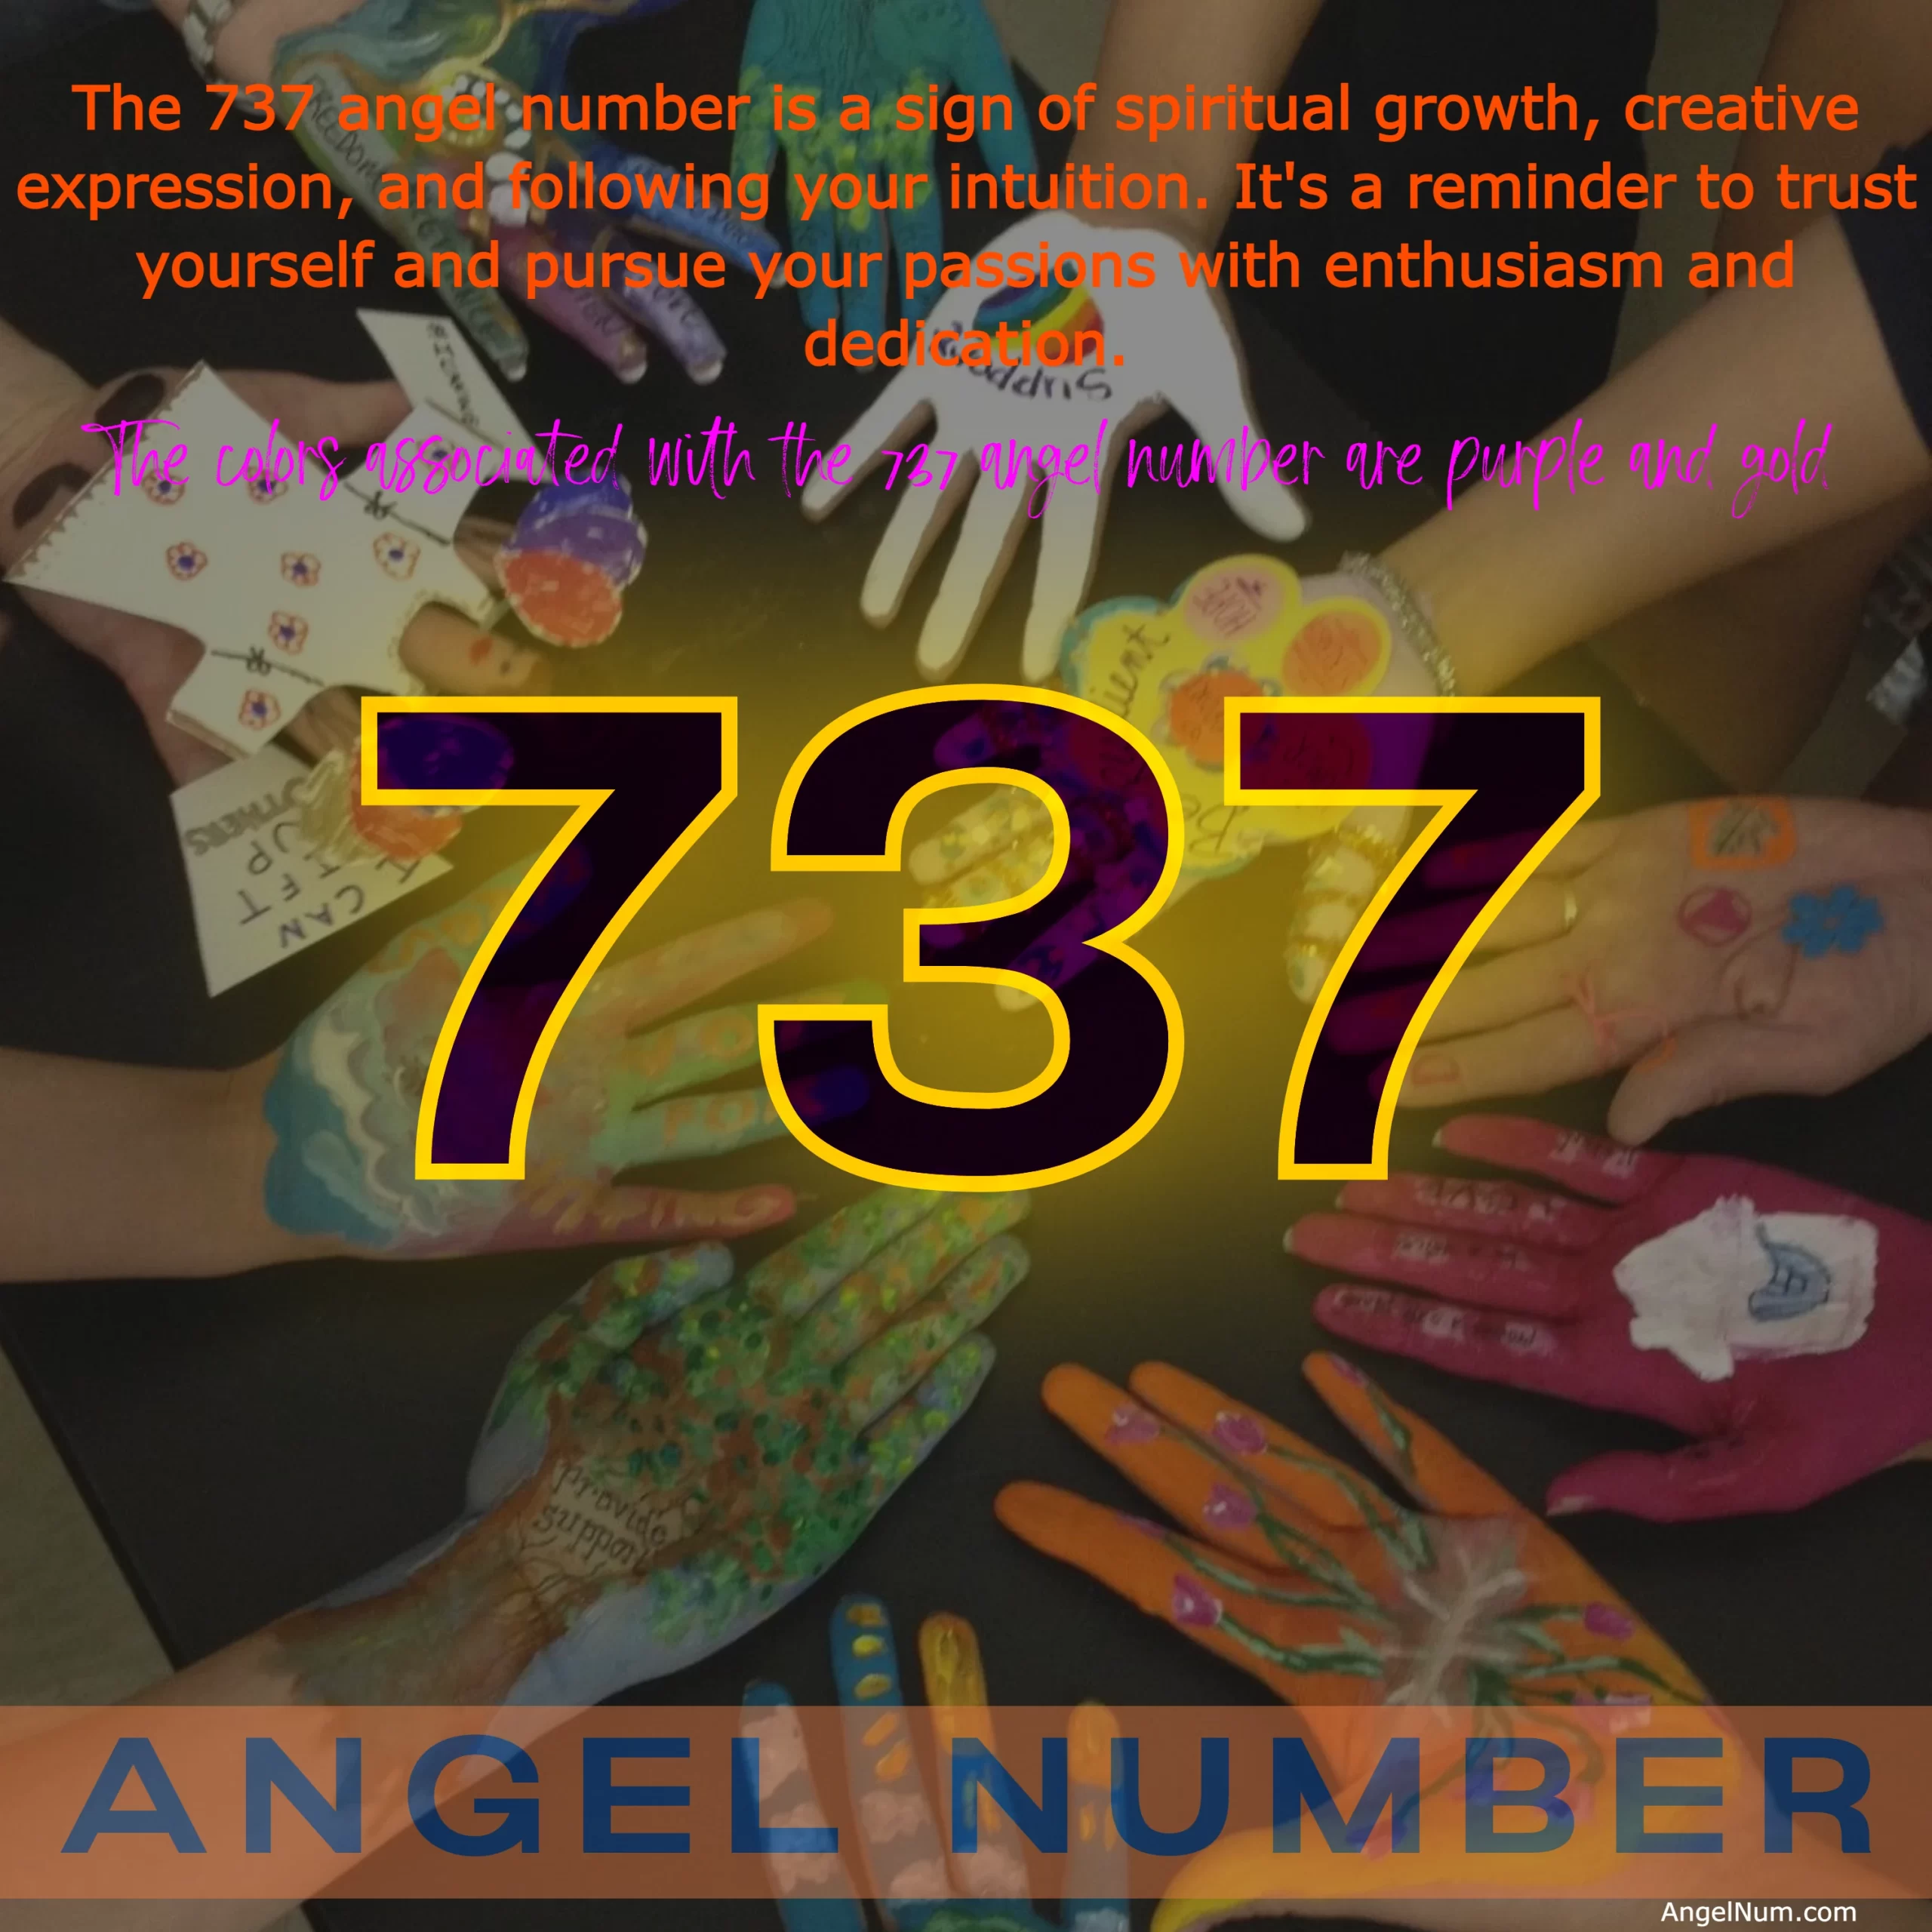 Angel Number 737: Discover the Spiritual Meaning and Symbolism